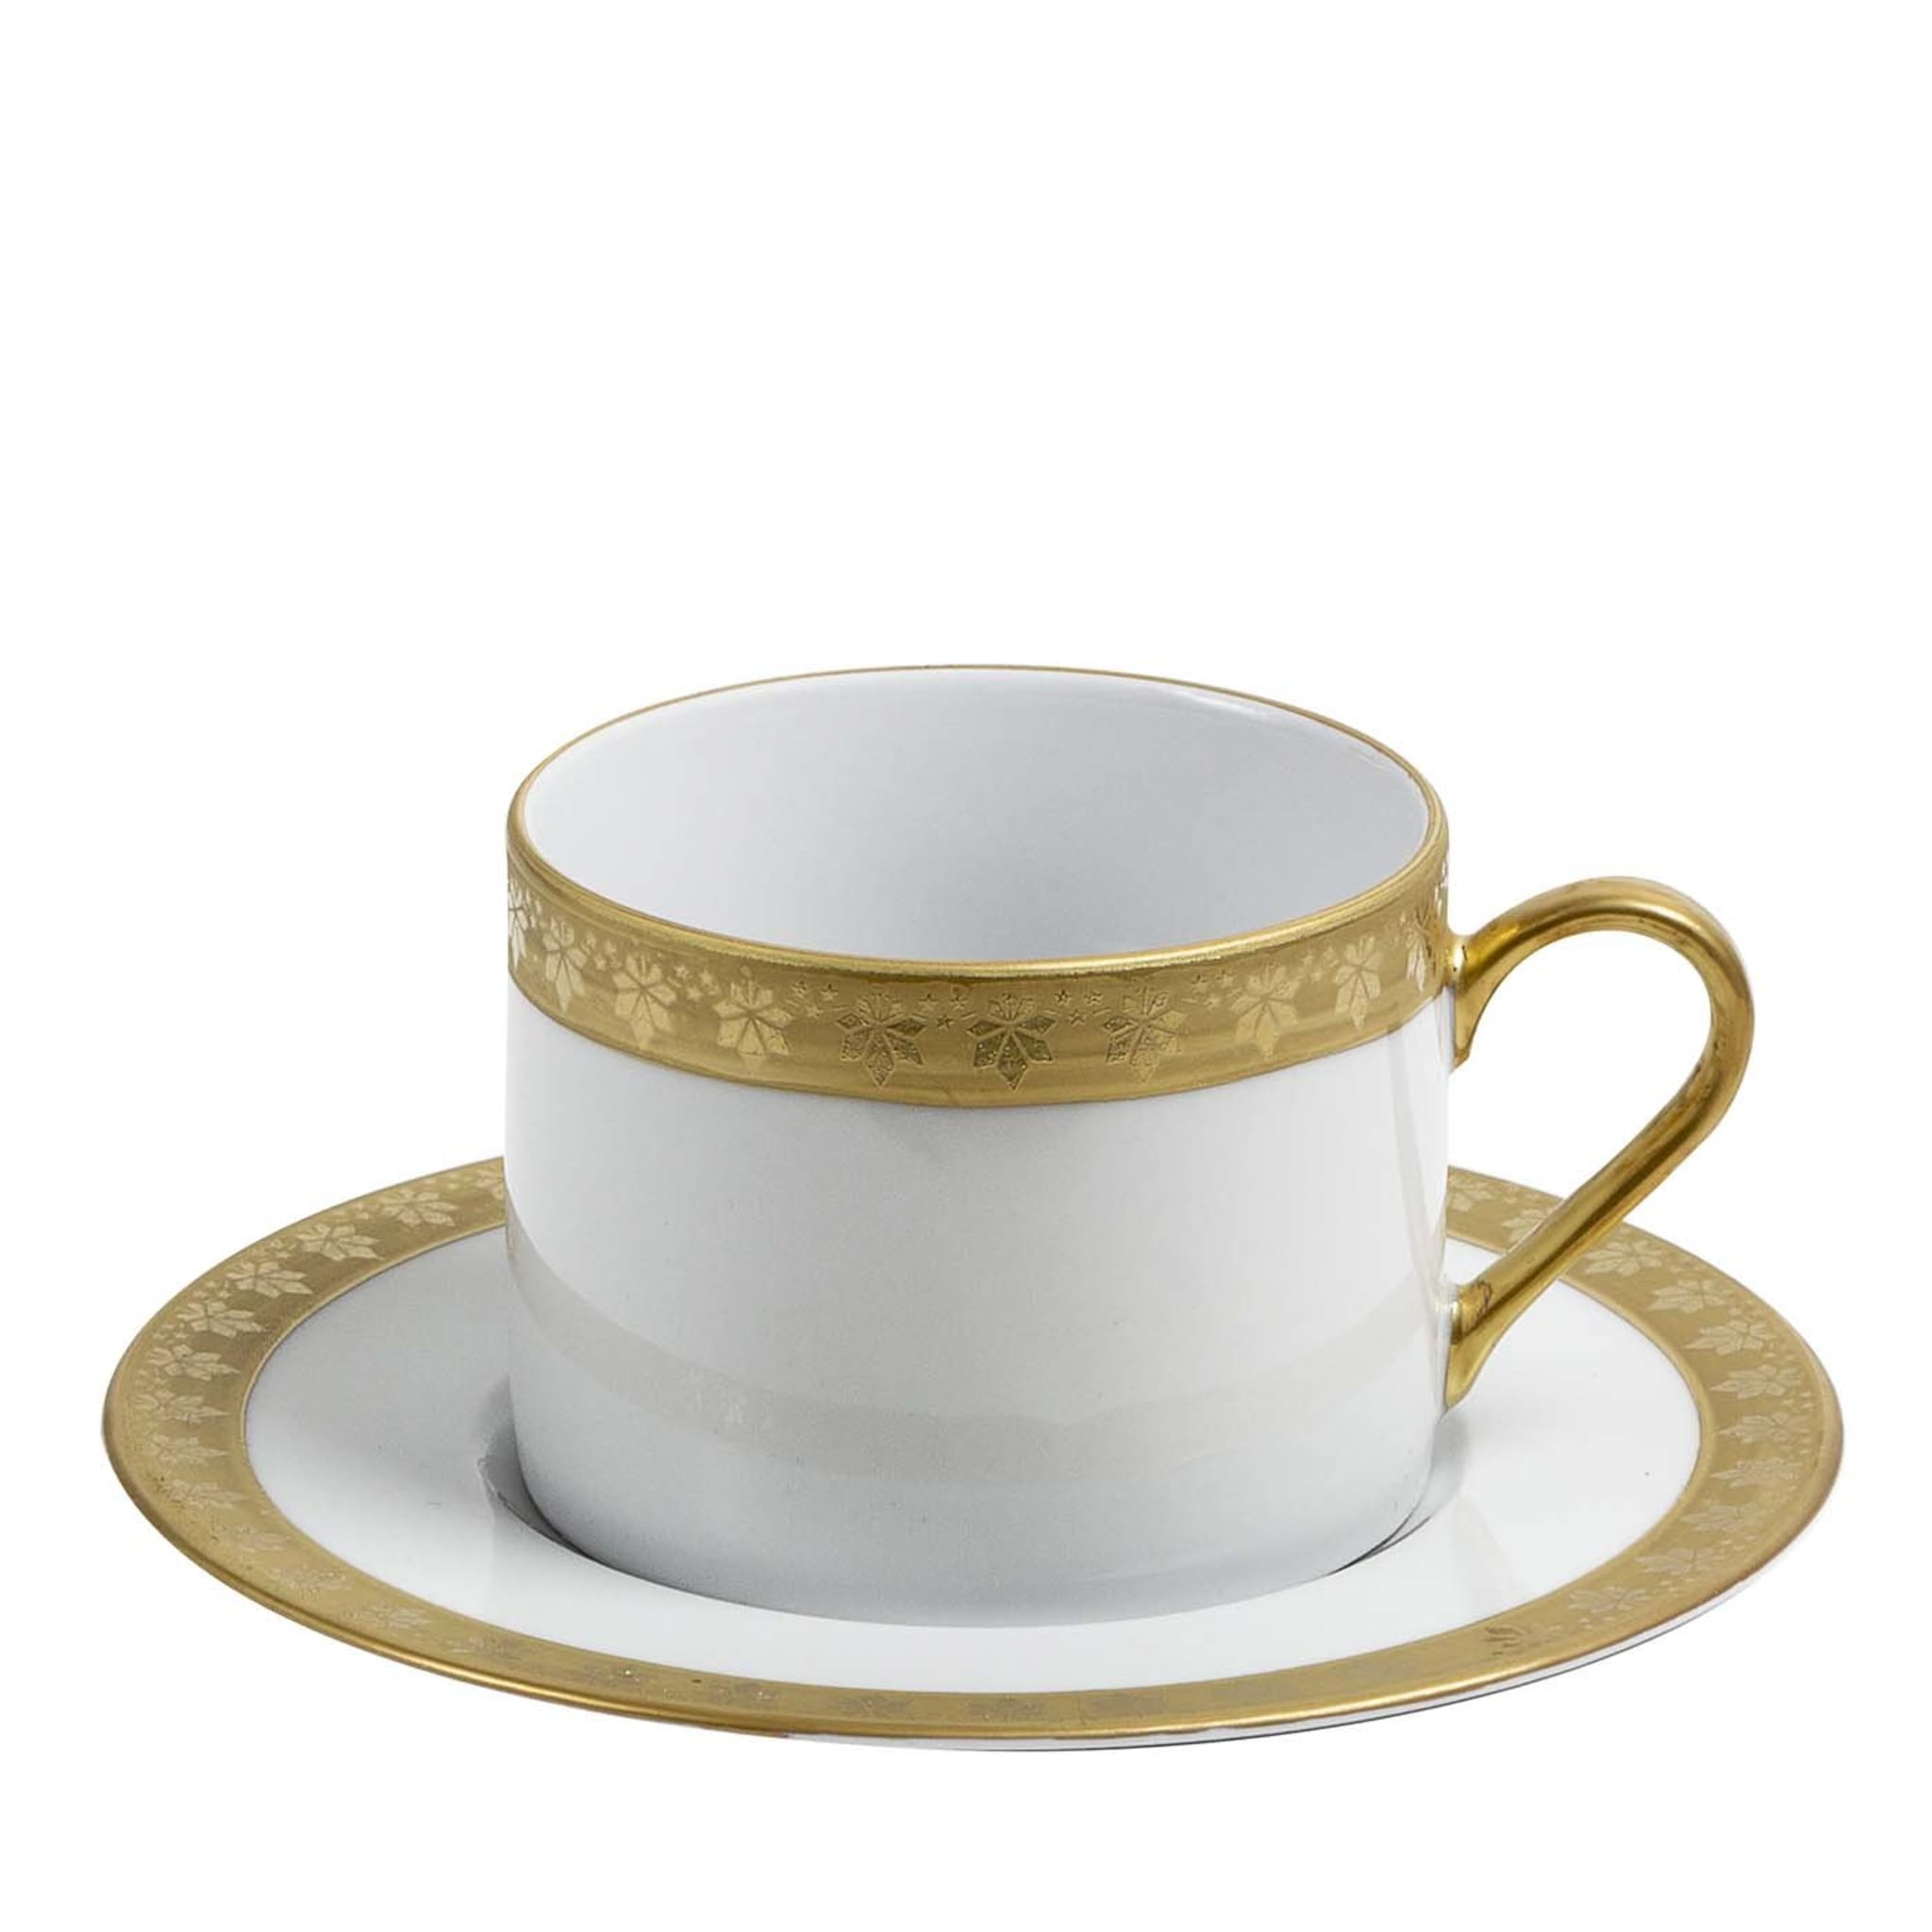 Set of 6 White&Gold Tea Cups and Saucers - Main view